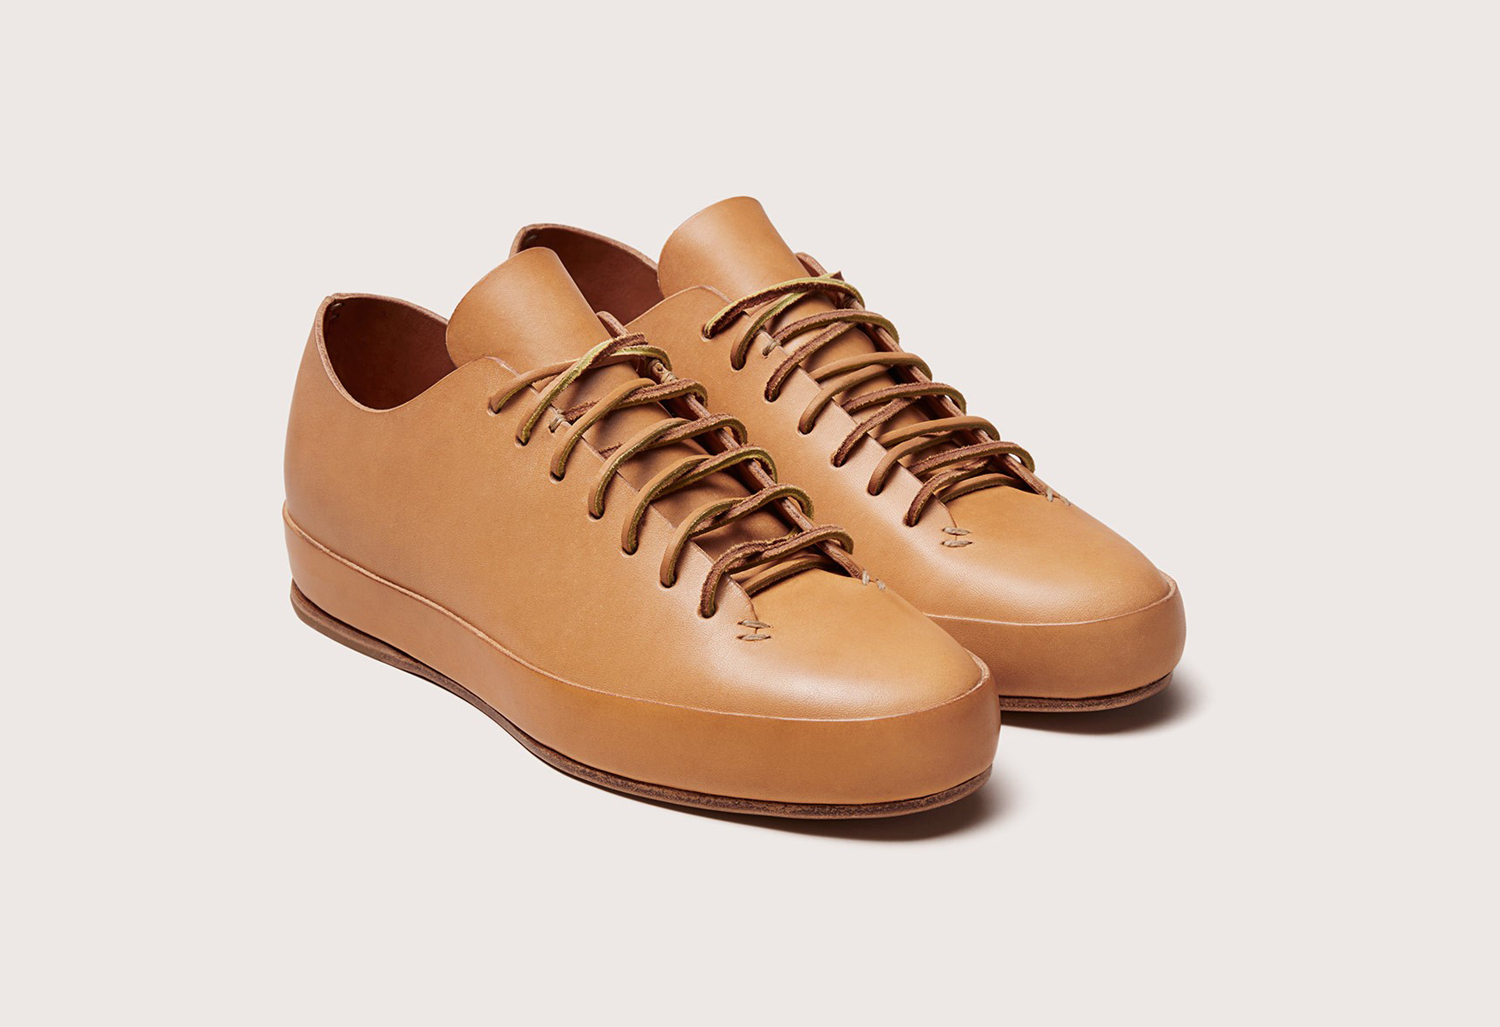 Feit hand sewn low Lux Sneakers for ons clothing